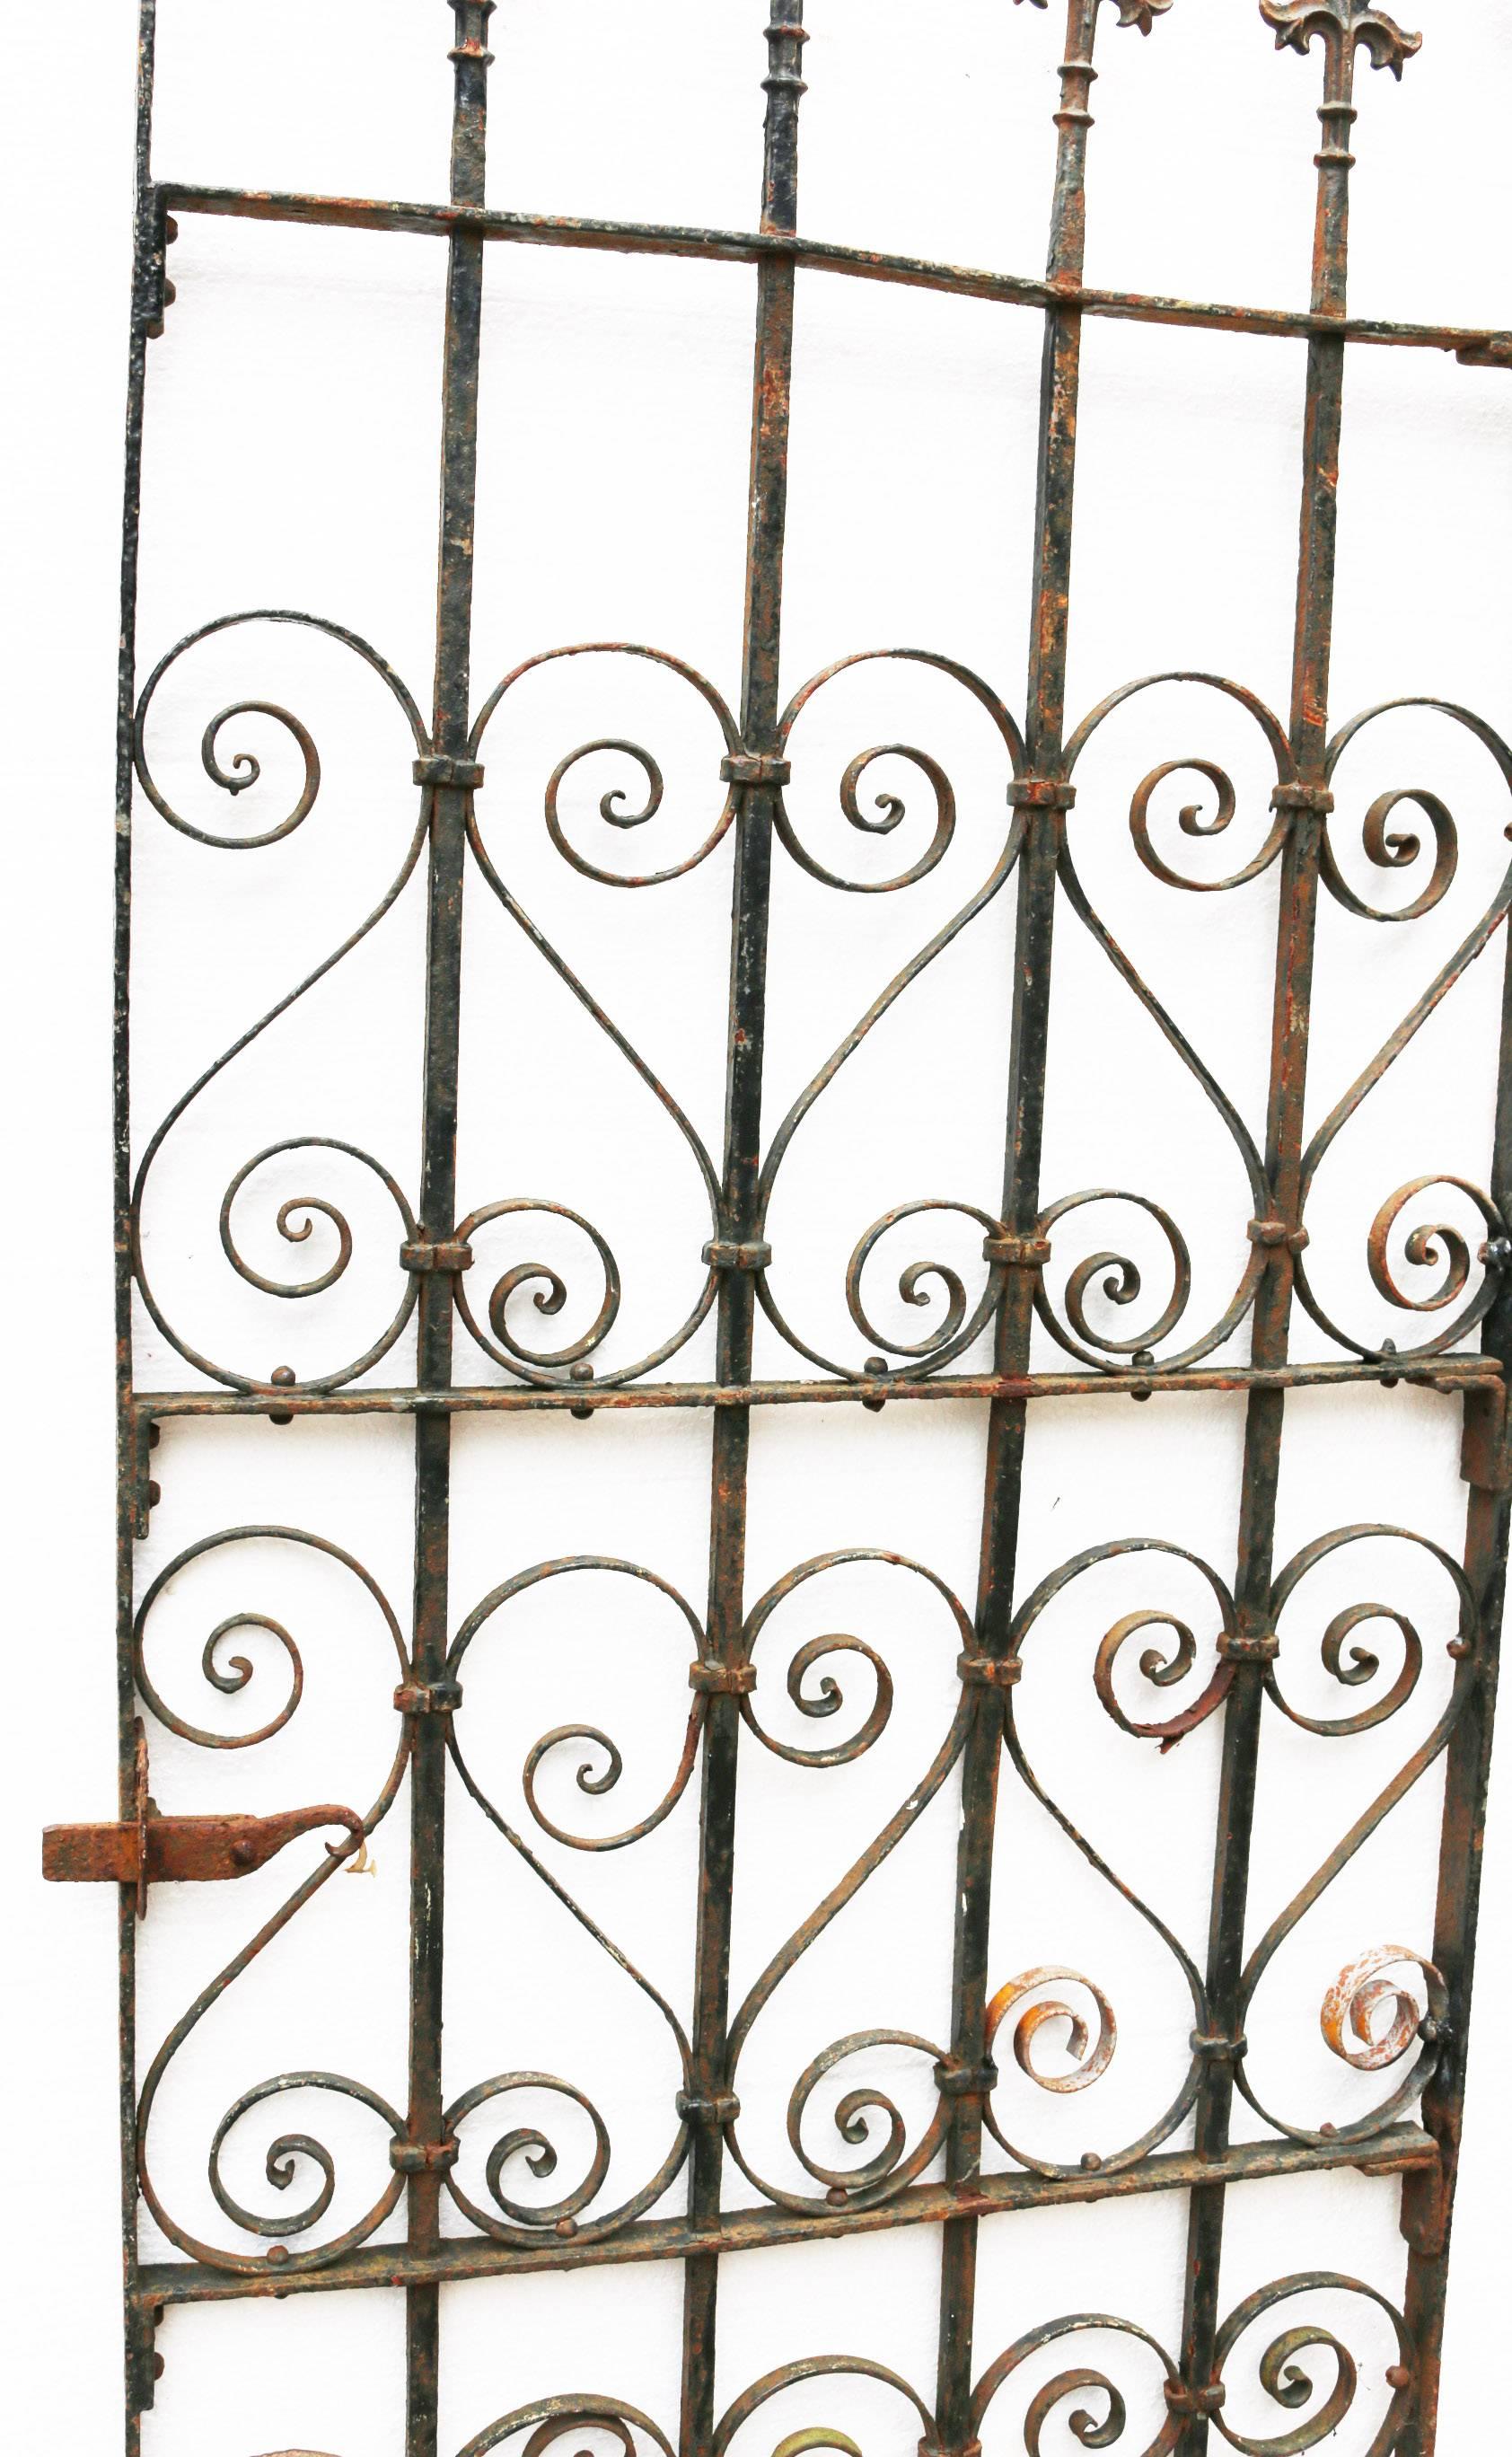 This gate has a working latch.
Measure: Width 66 cm (including hinges and latch) 70 cm
Weight 26 kg.